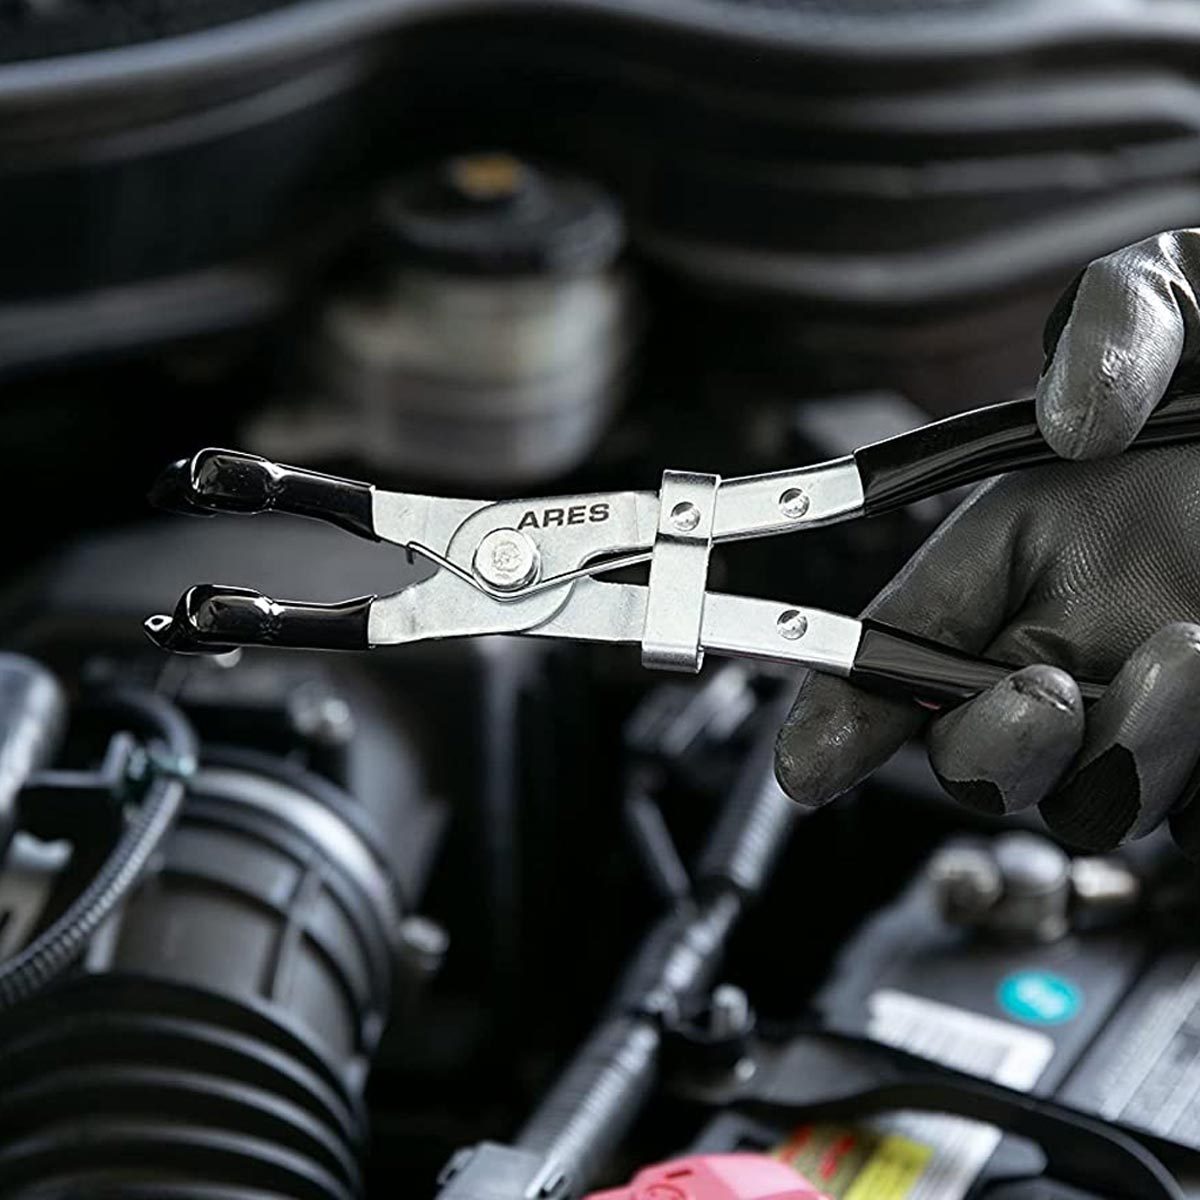 9 Spark Plug Removal Tools for Easy At-Home Car Maintenance